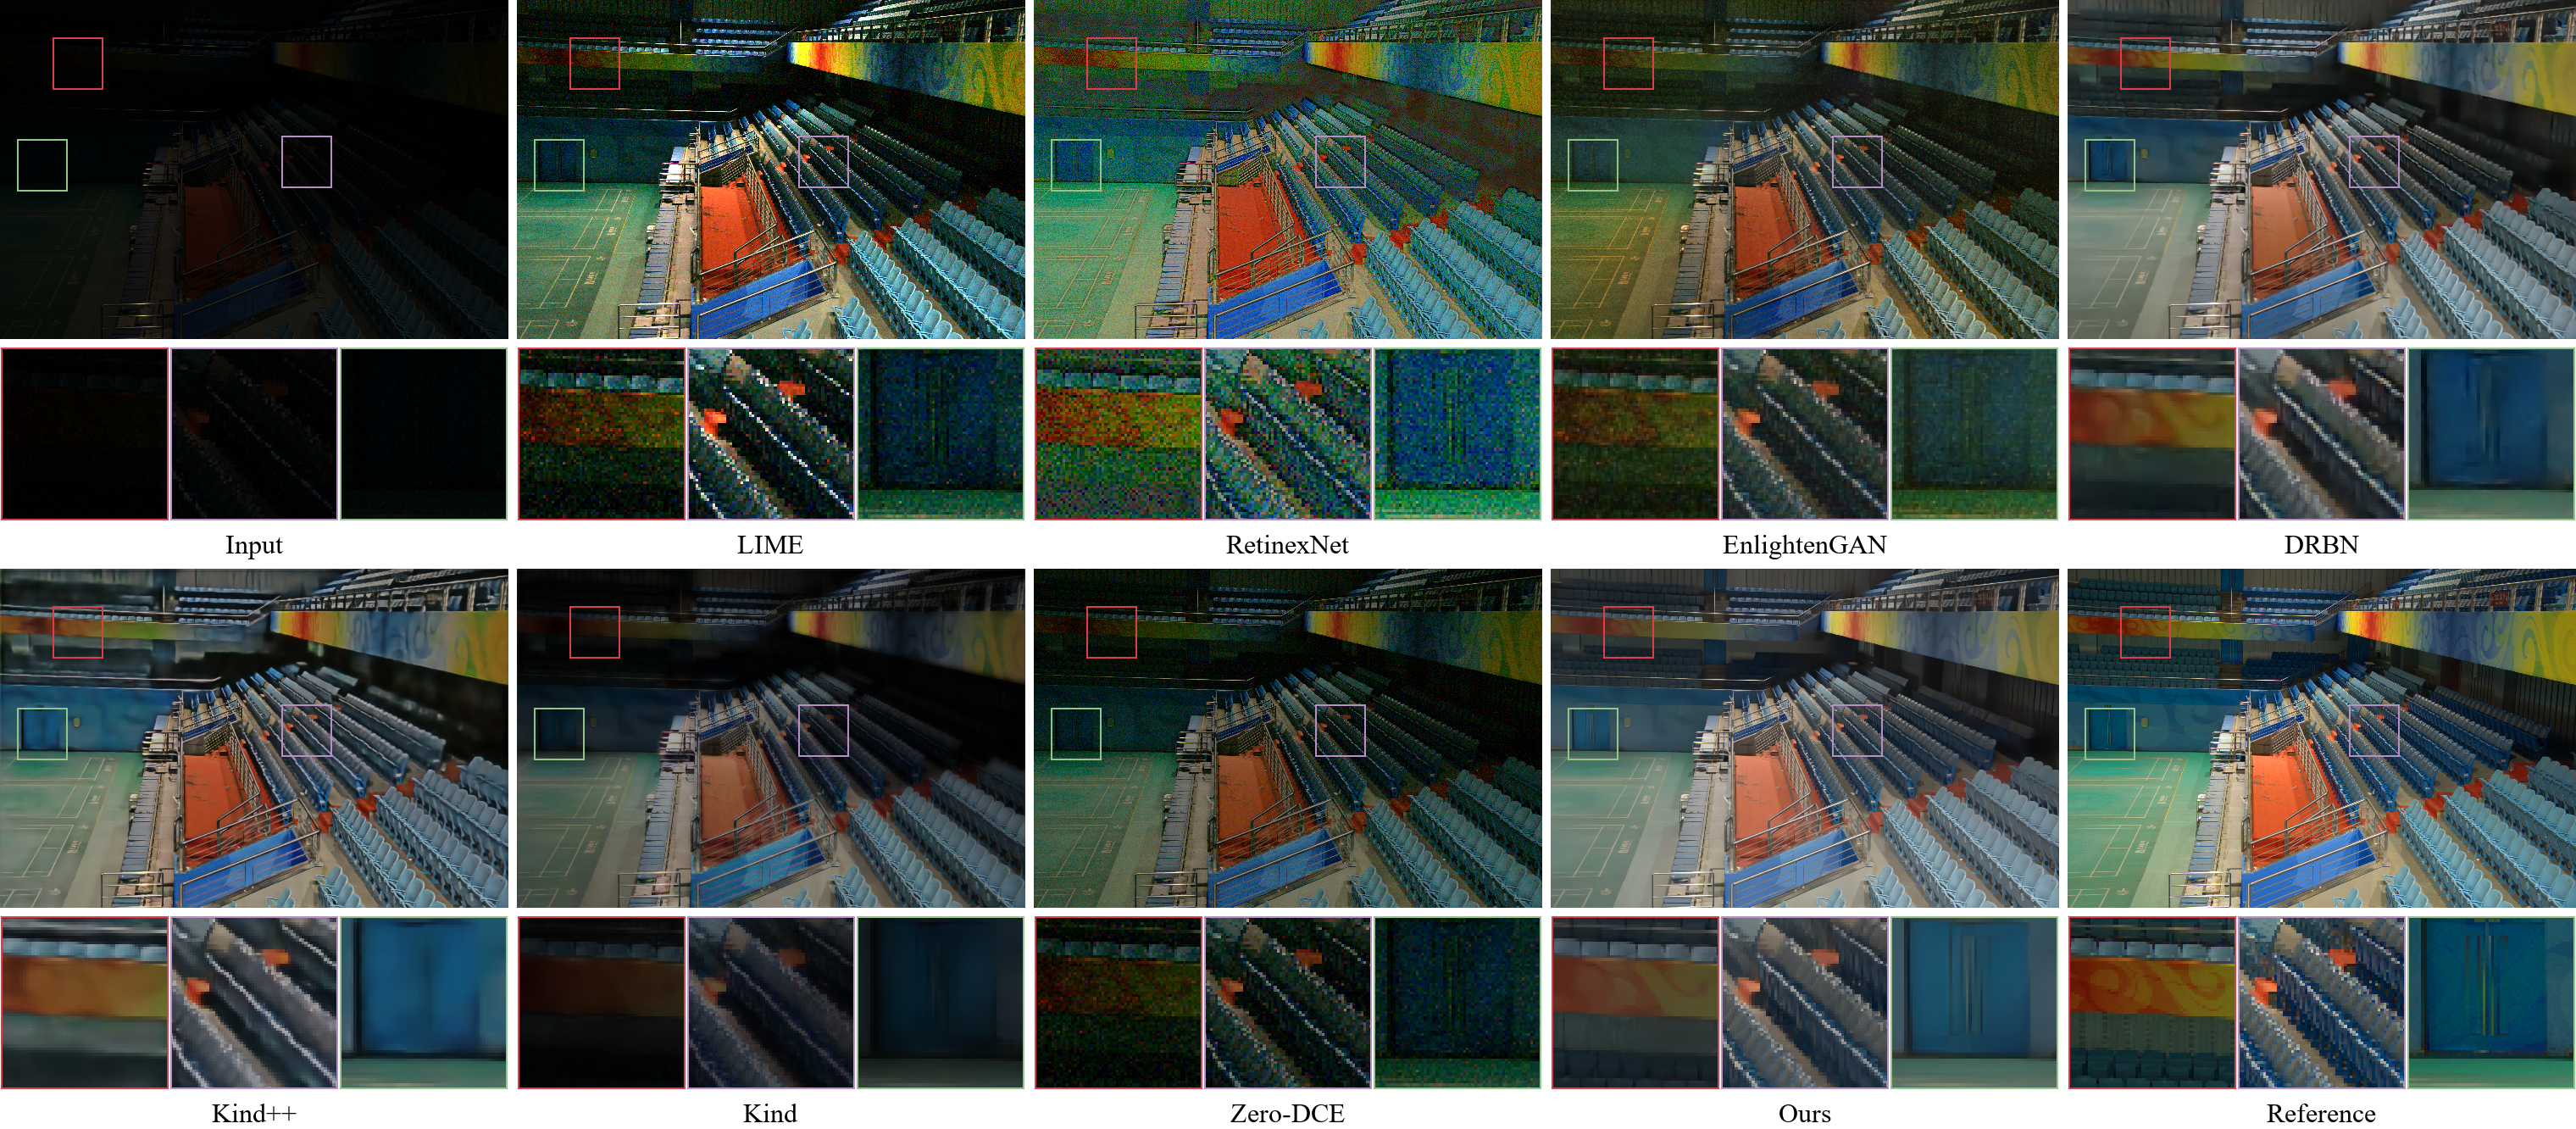 Visual comparison with state-of-the-art low-light image enhancement methods on LOL dataset.